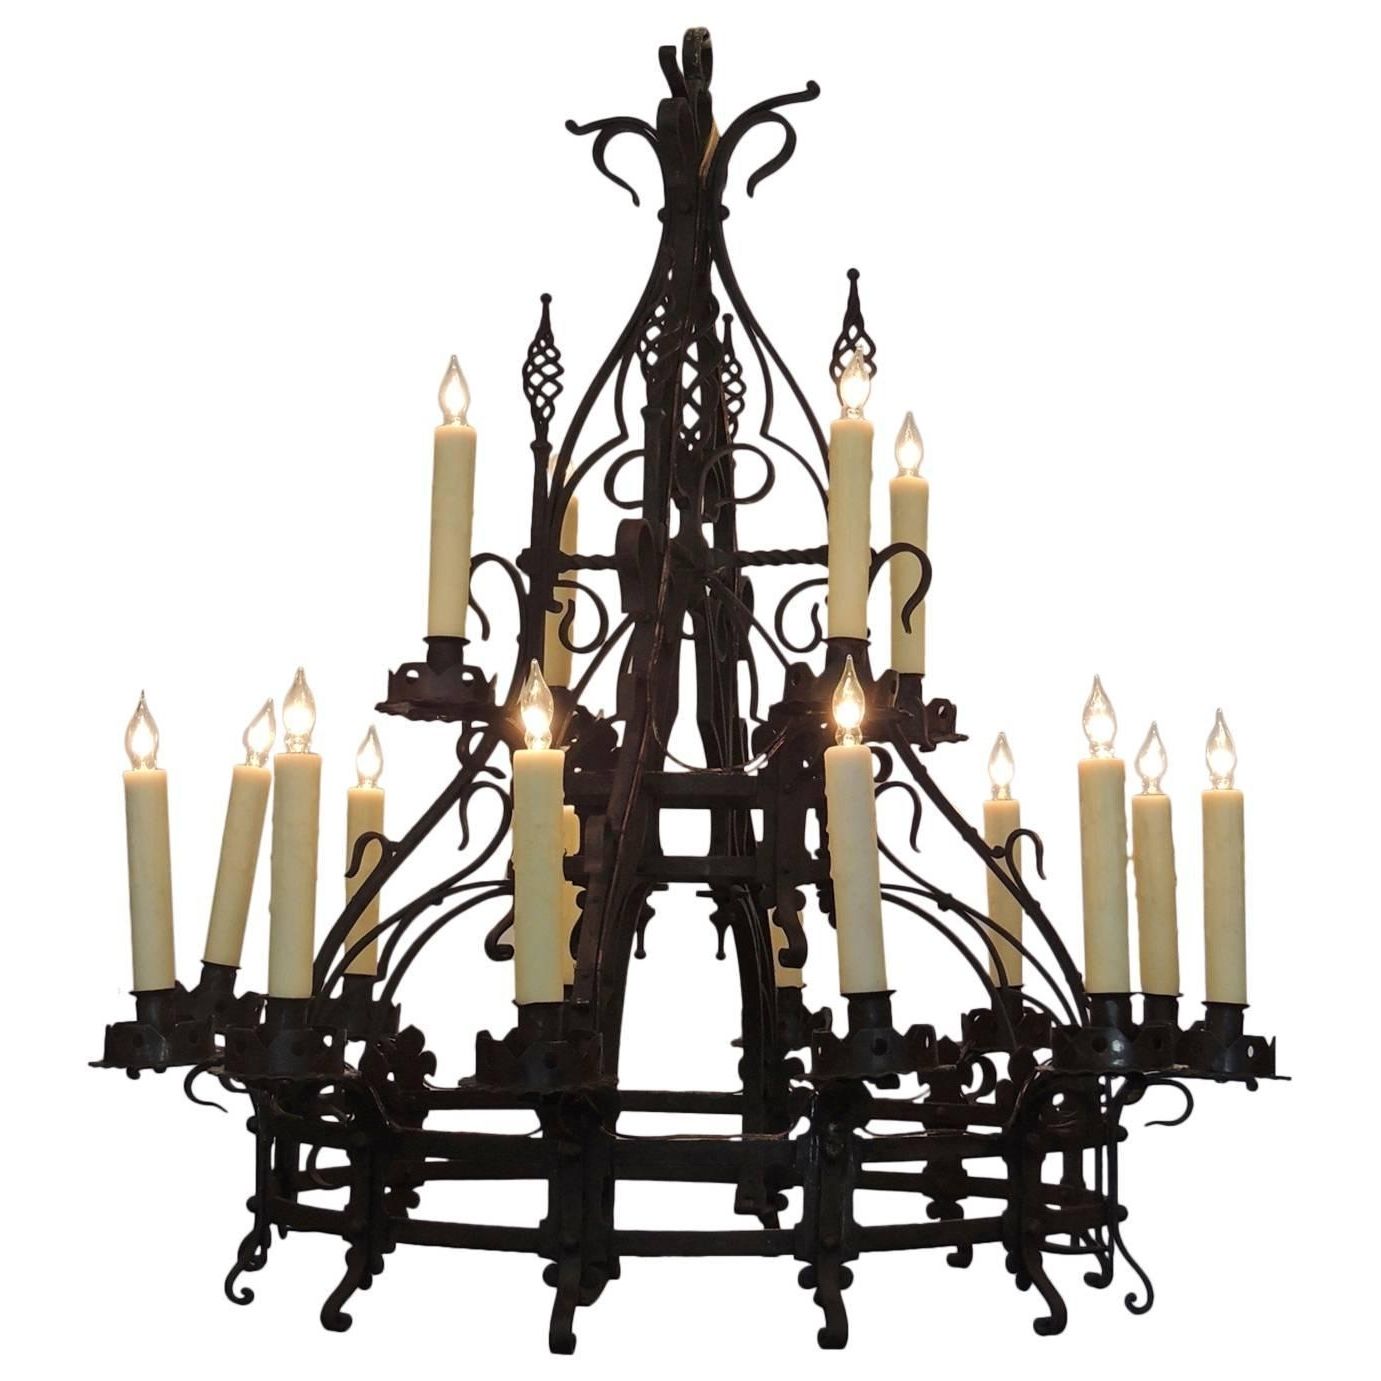 Cast Iron Chandelier In Preferred Late 19th C French Gothic Wrought Iron Chandelier For Sale At 1stdibs (View 2 of 15)